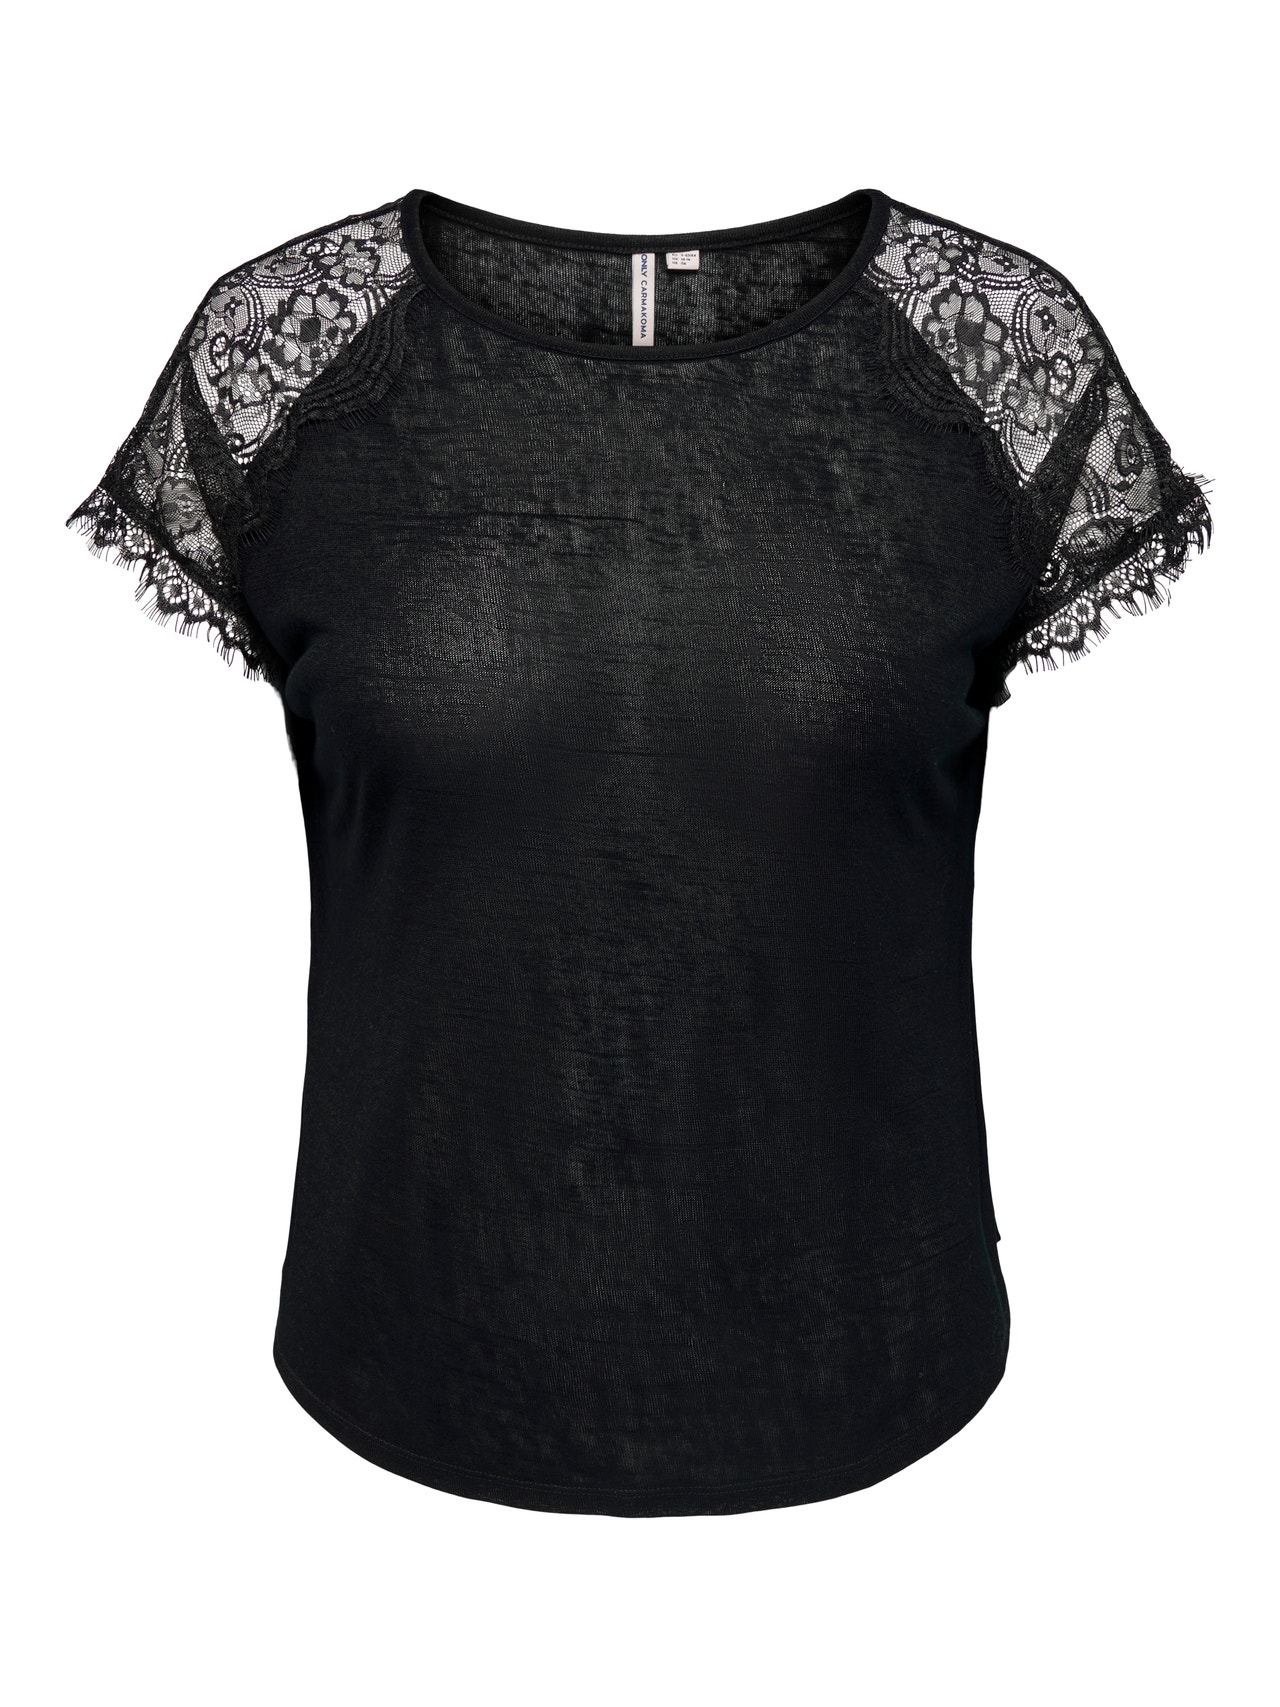 ONLY Curvy lace detail Top -Black - 15227095